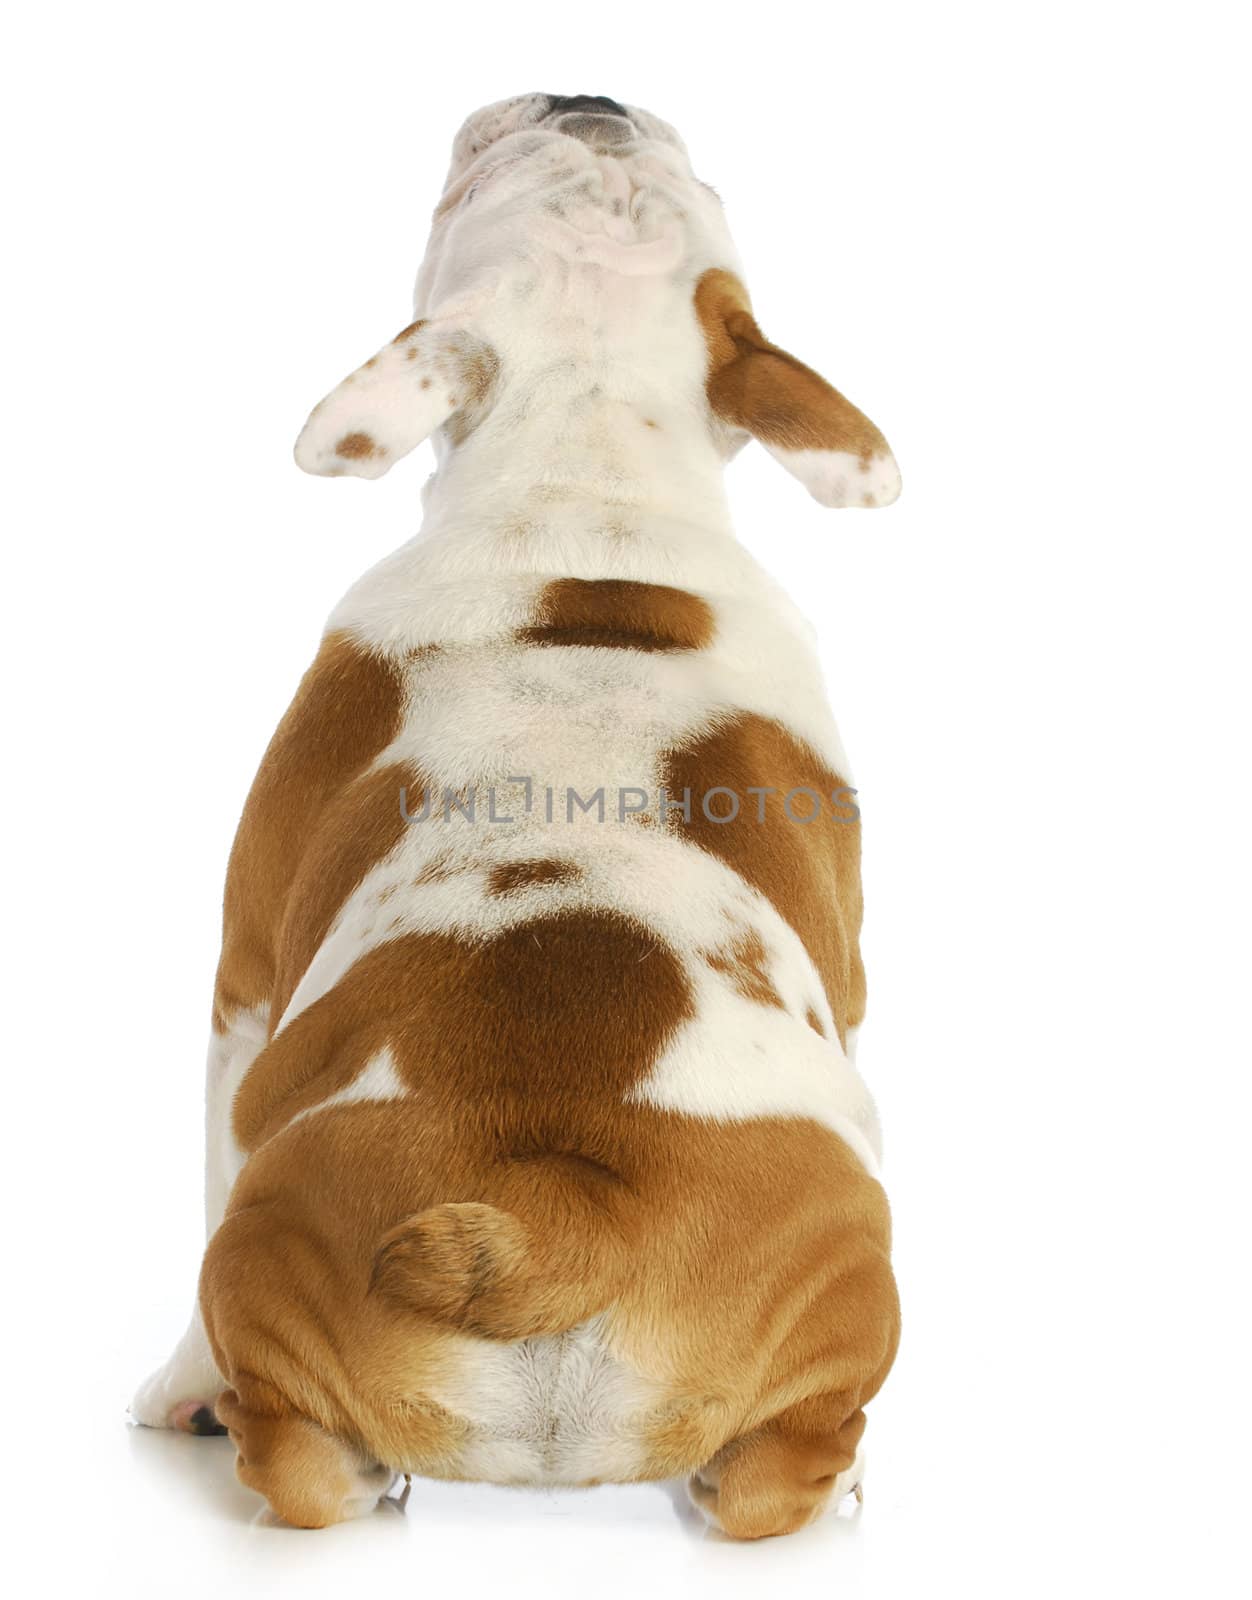 puppy looking up - english bulldog puppy from rear view looking up on white background